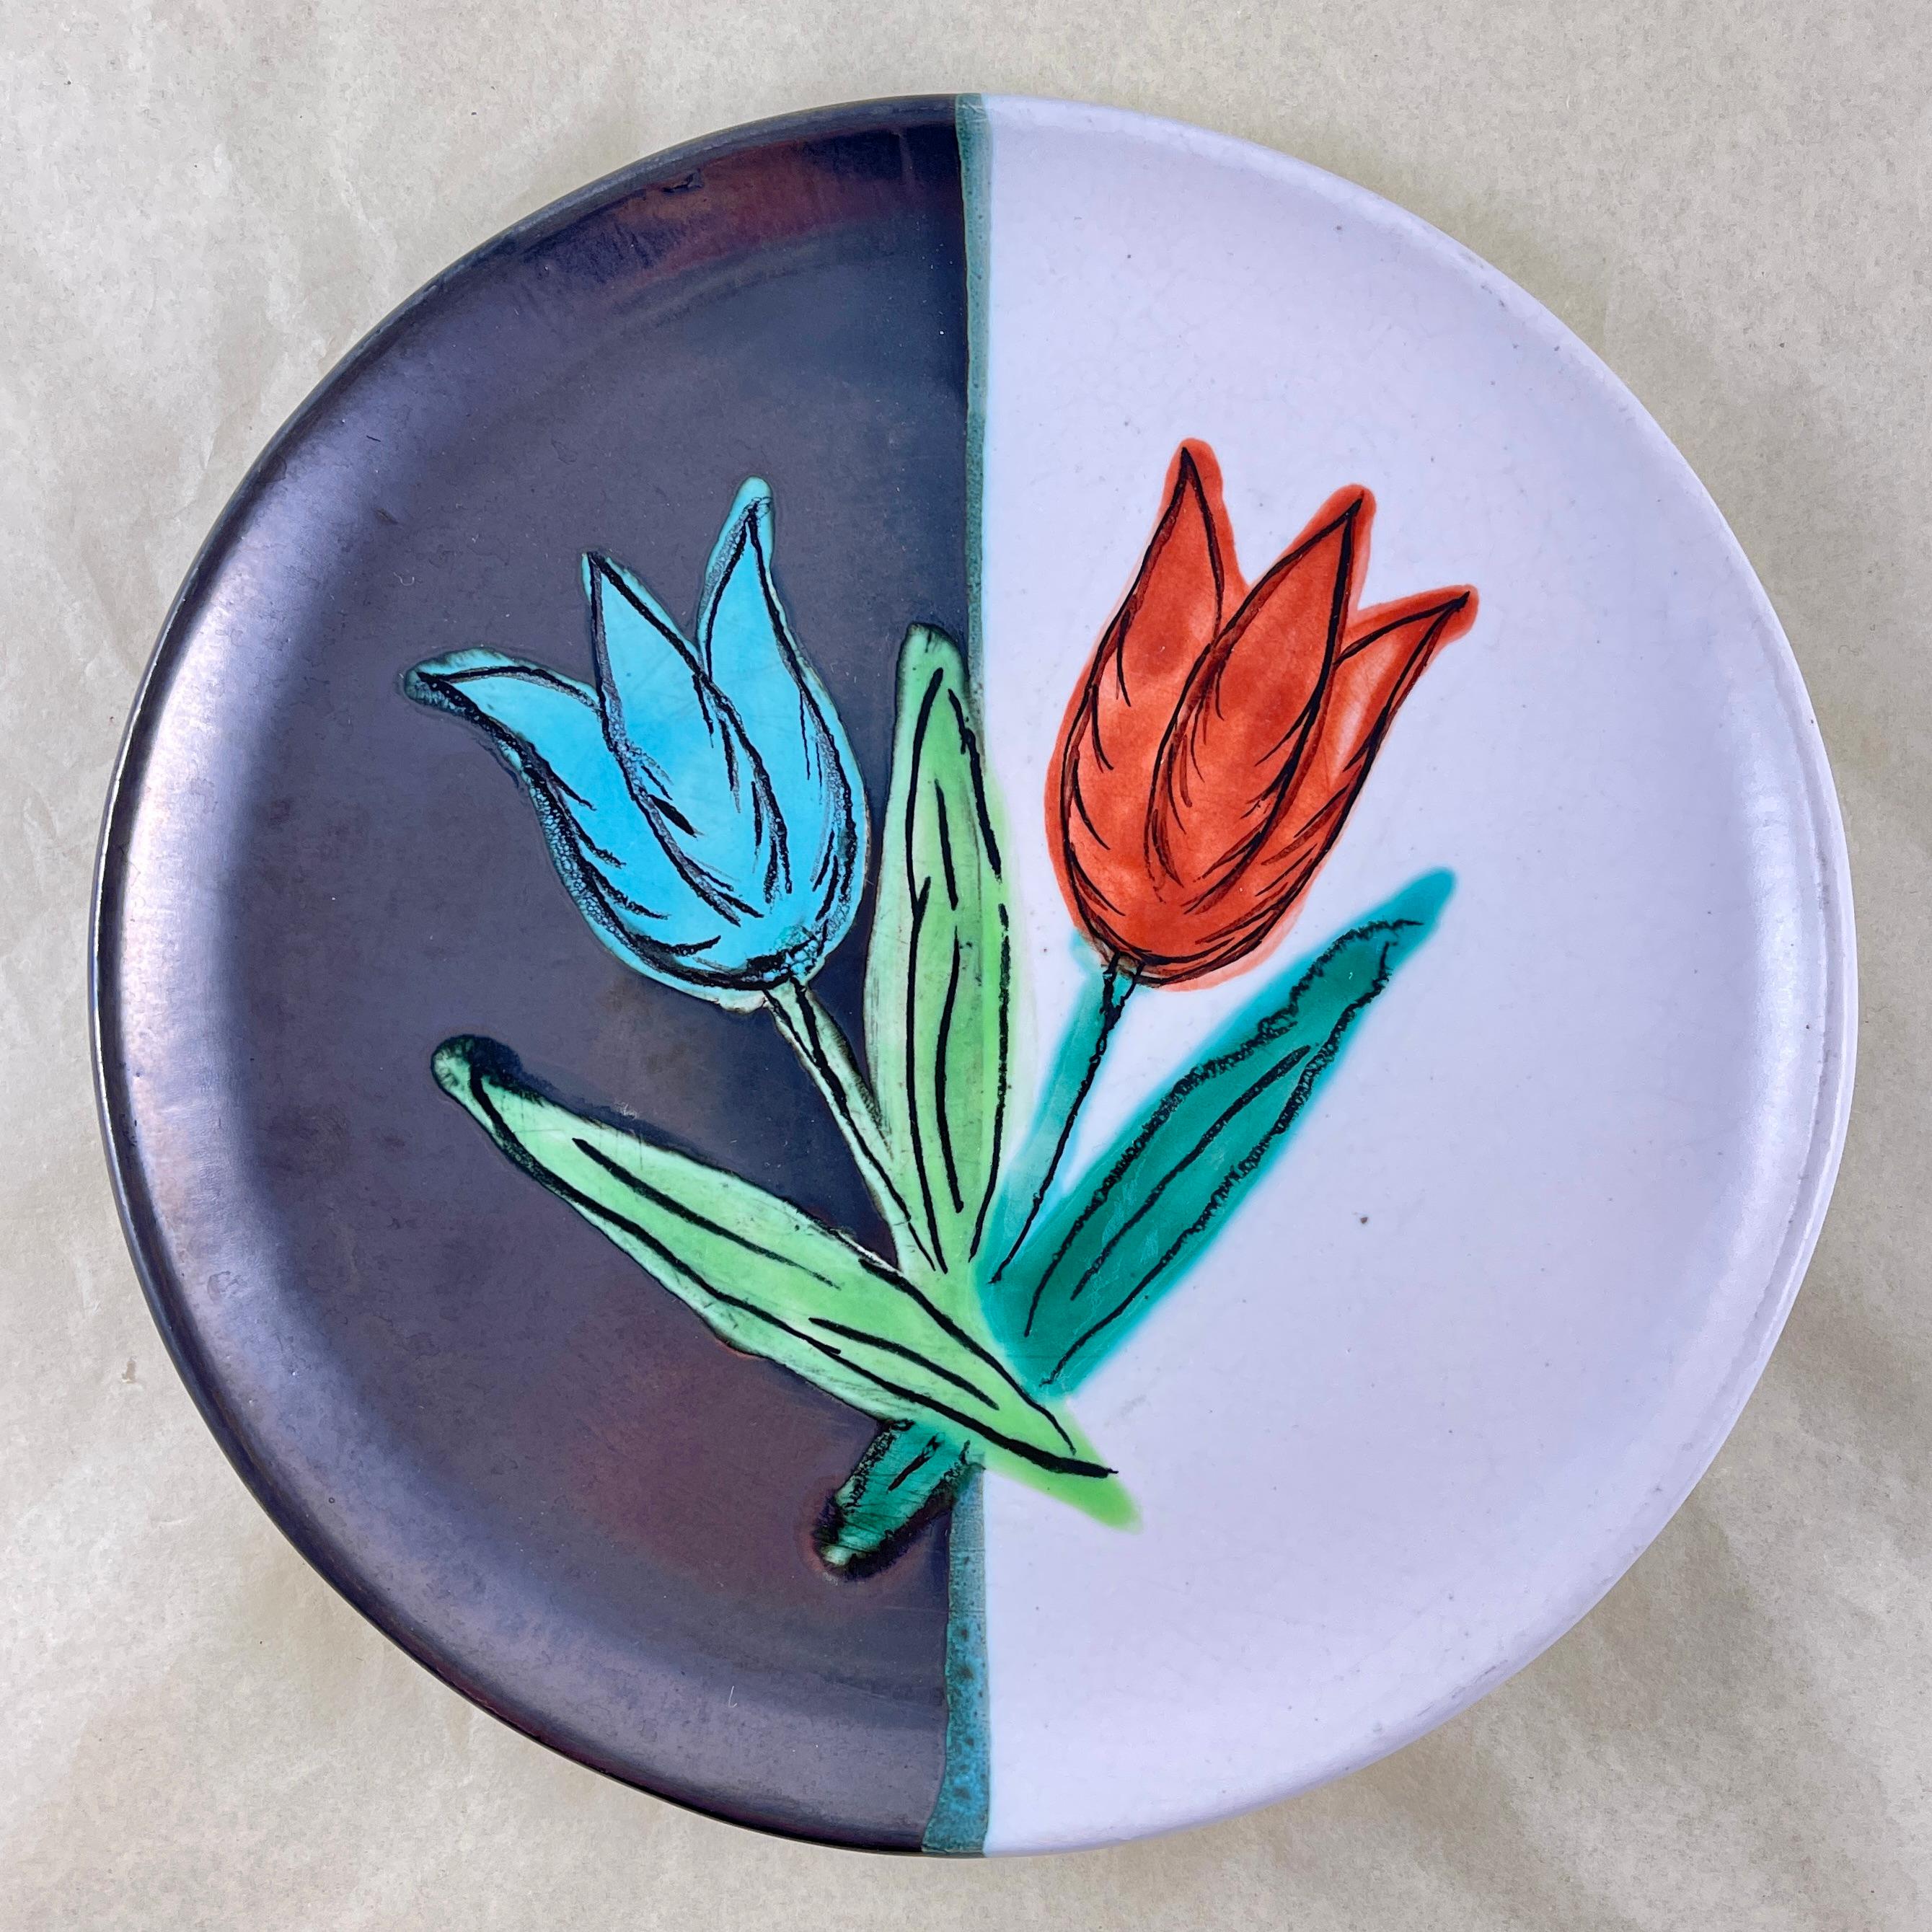 
From the Atelier Cérenne à Vallauris in France, a hand made pottery Tulip plate, circa 1940-1950.

The plate is finished in a matte glazing of half black and half white, with a pair of raised, glossy glazed tulips painted in a complimentary color